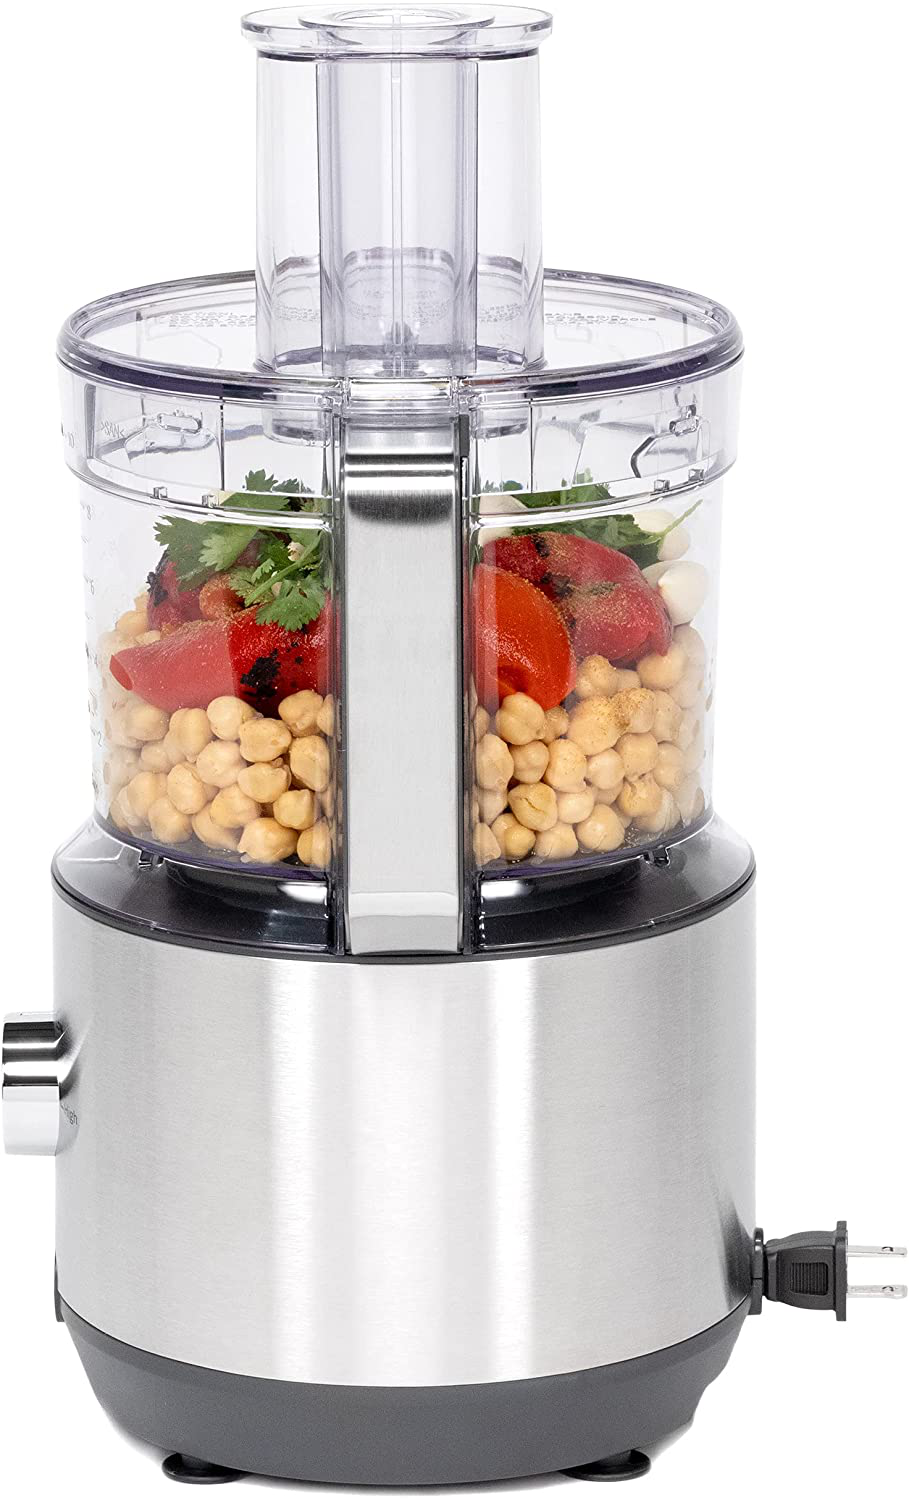 GE Food Processor | 12 Cup | Complete with 3 Feeding Tubes, Stainless Steel Mixing Blade & Shredding Disc | 3 Speed | Great for Shredded Cheese, Chicken & More | Kitchen Essentials | 550 Watts